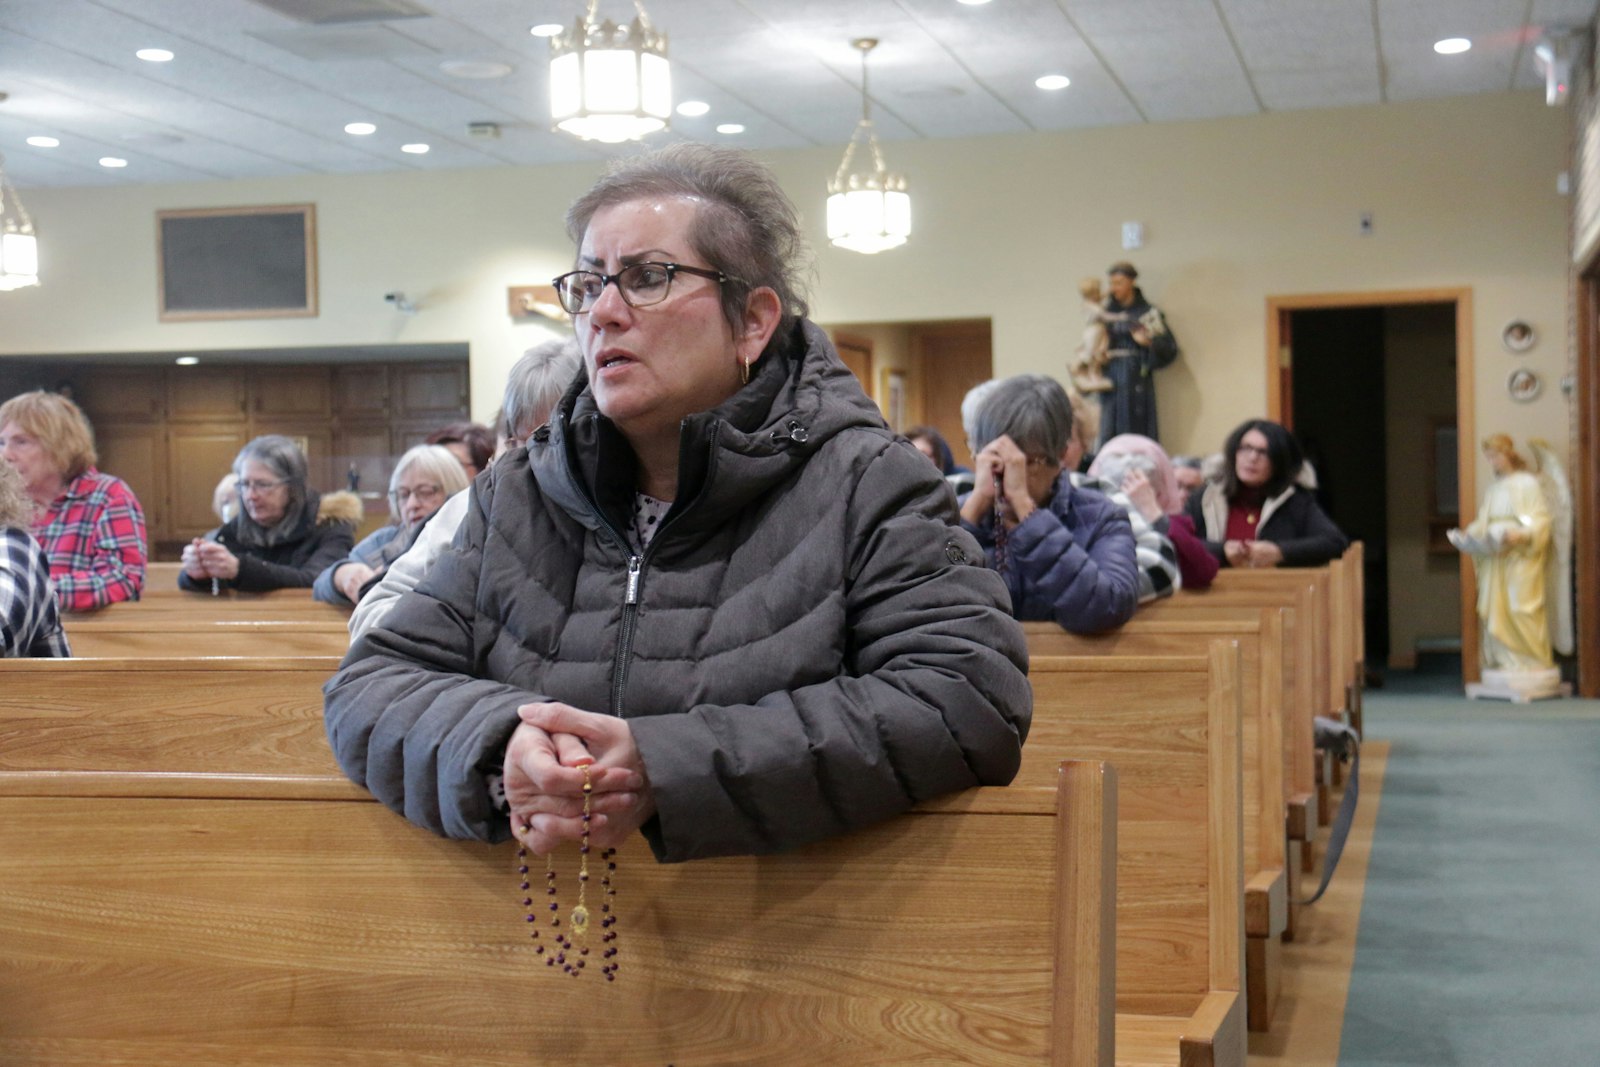 About 50 people took part in a special holy hour and prayer for peace March 13 at the Our Lady of Fatima Shrine in Riverview. The shrine, which was designated in 2020, is run by the World Apostolate of Fatima's Detroit Archdiocesan Division.